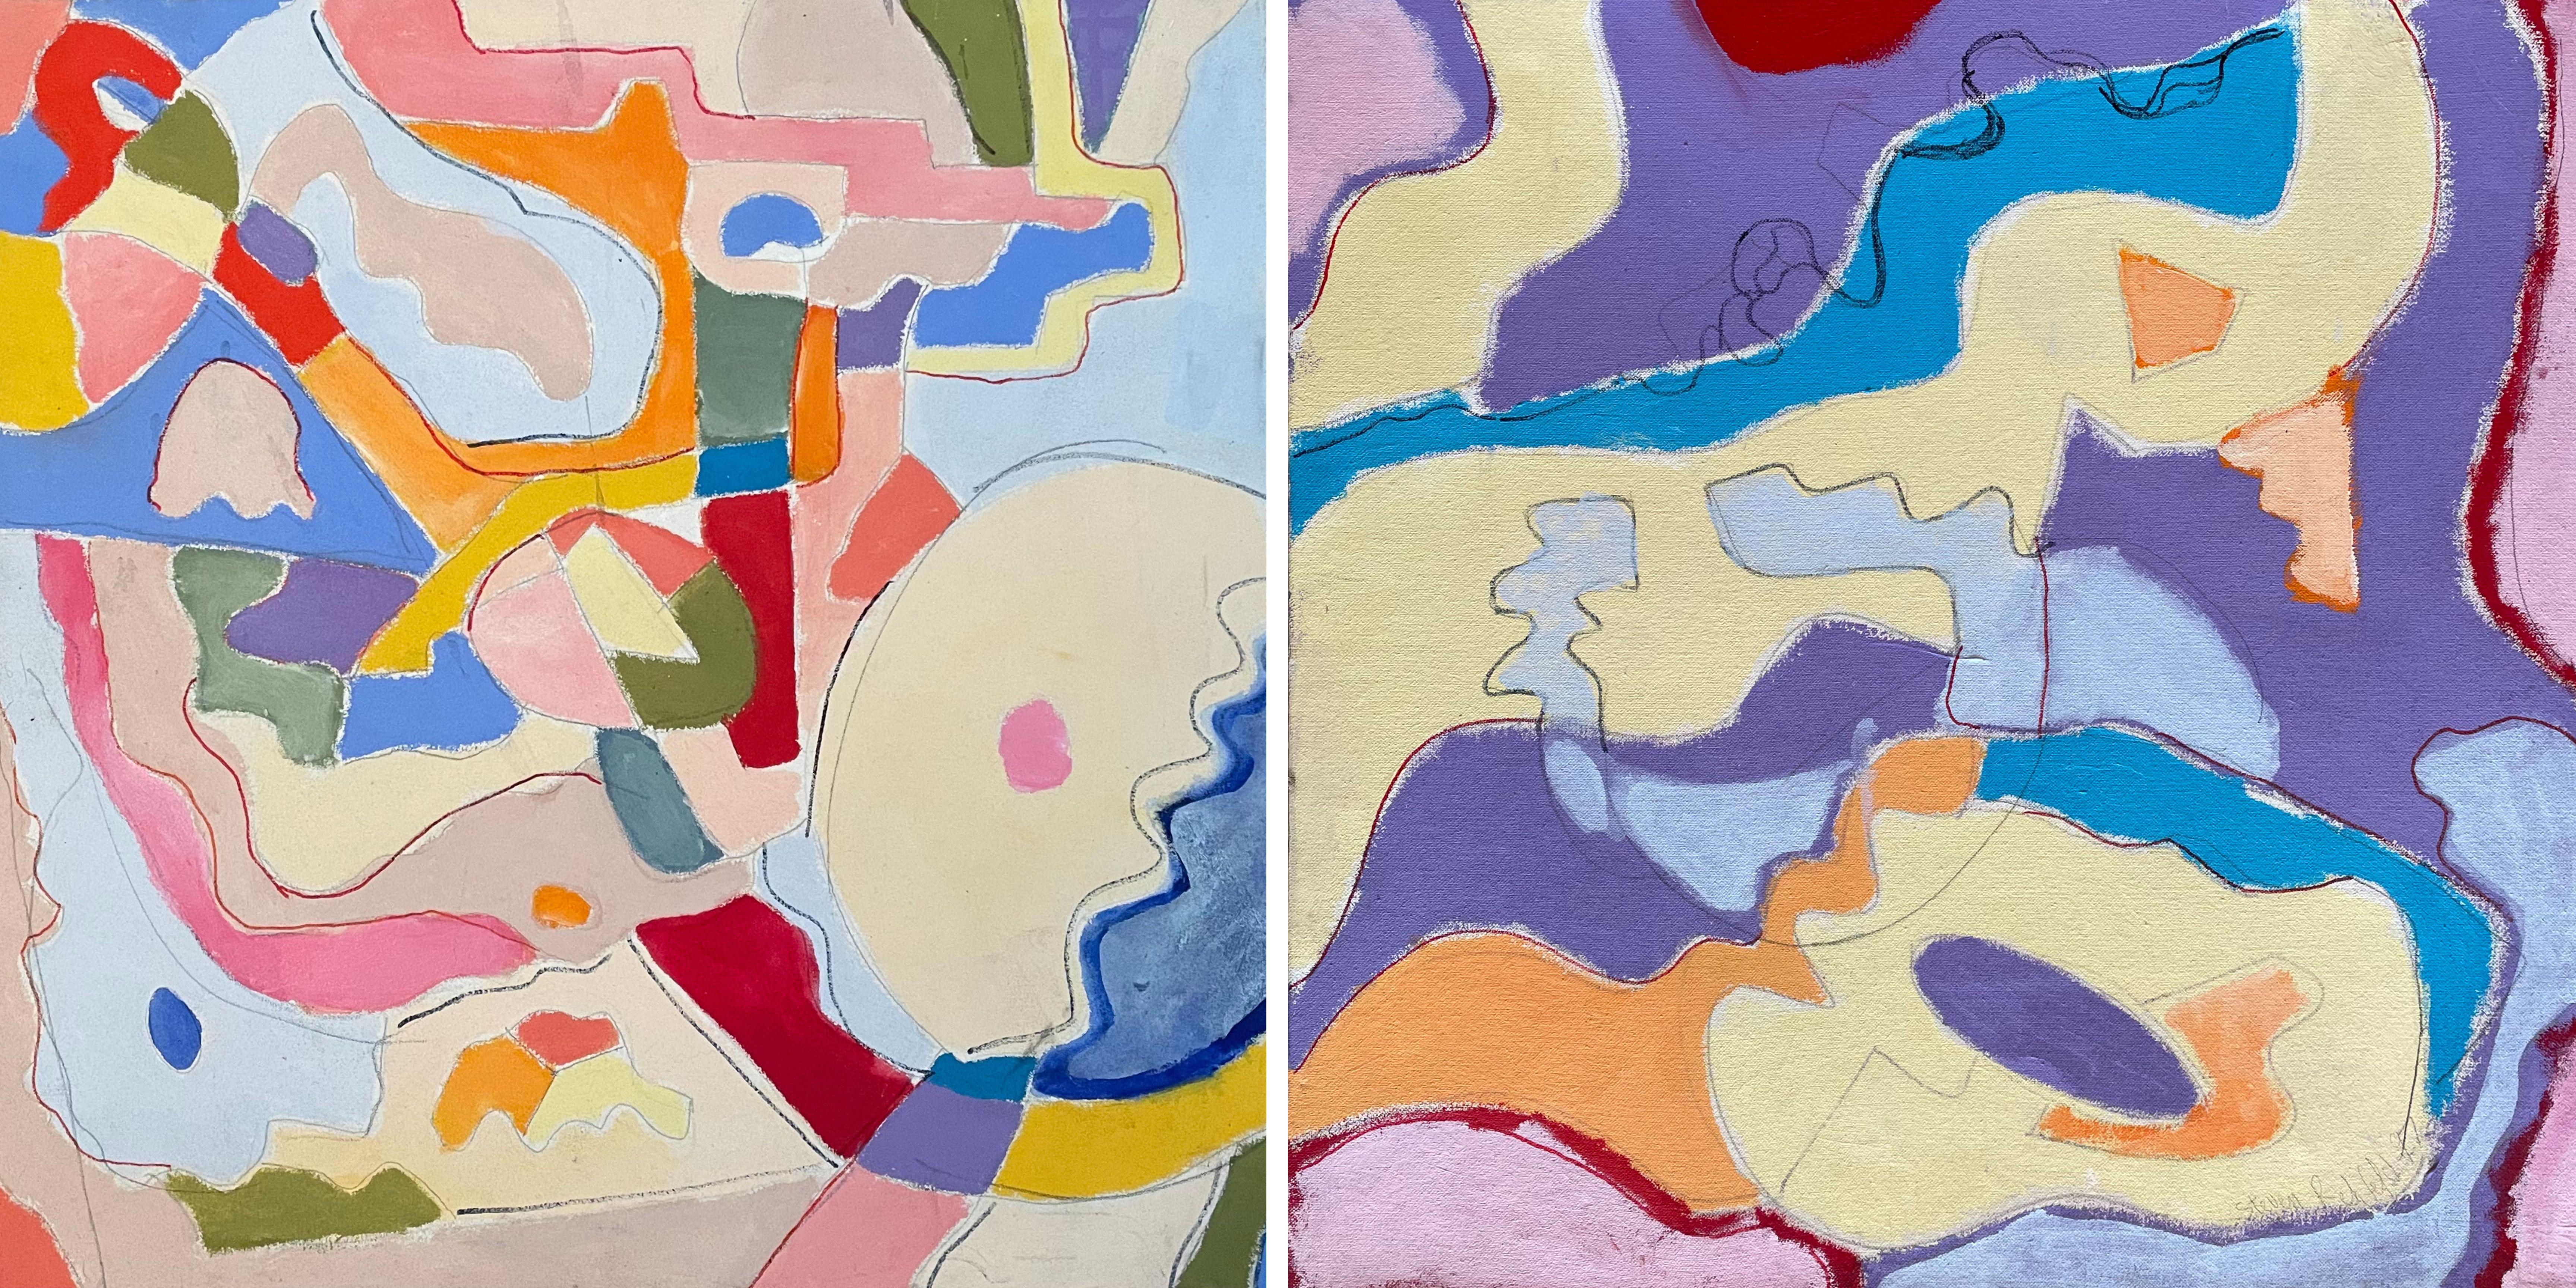 'Coastal' by Steven H. Rehfeld - Colorful Diptych Contemporary Abstract 